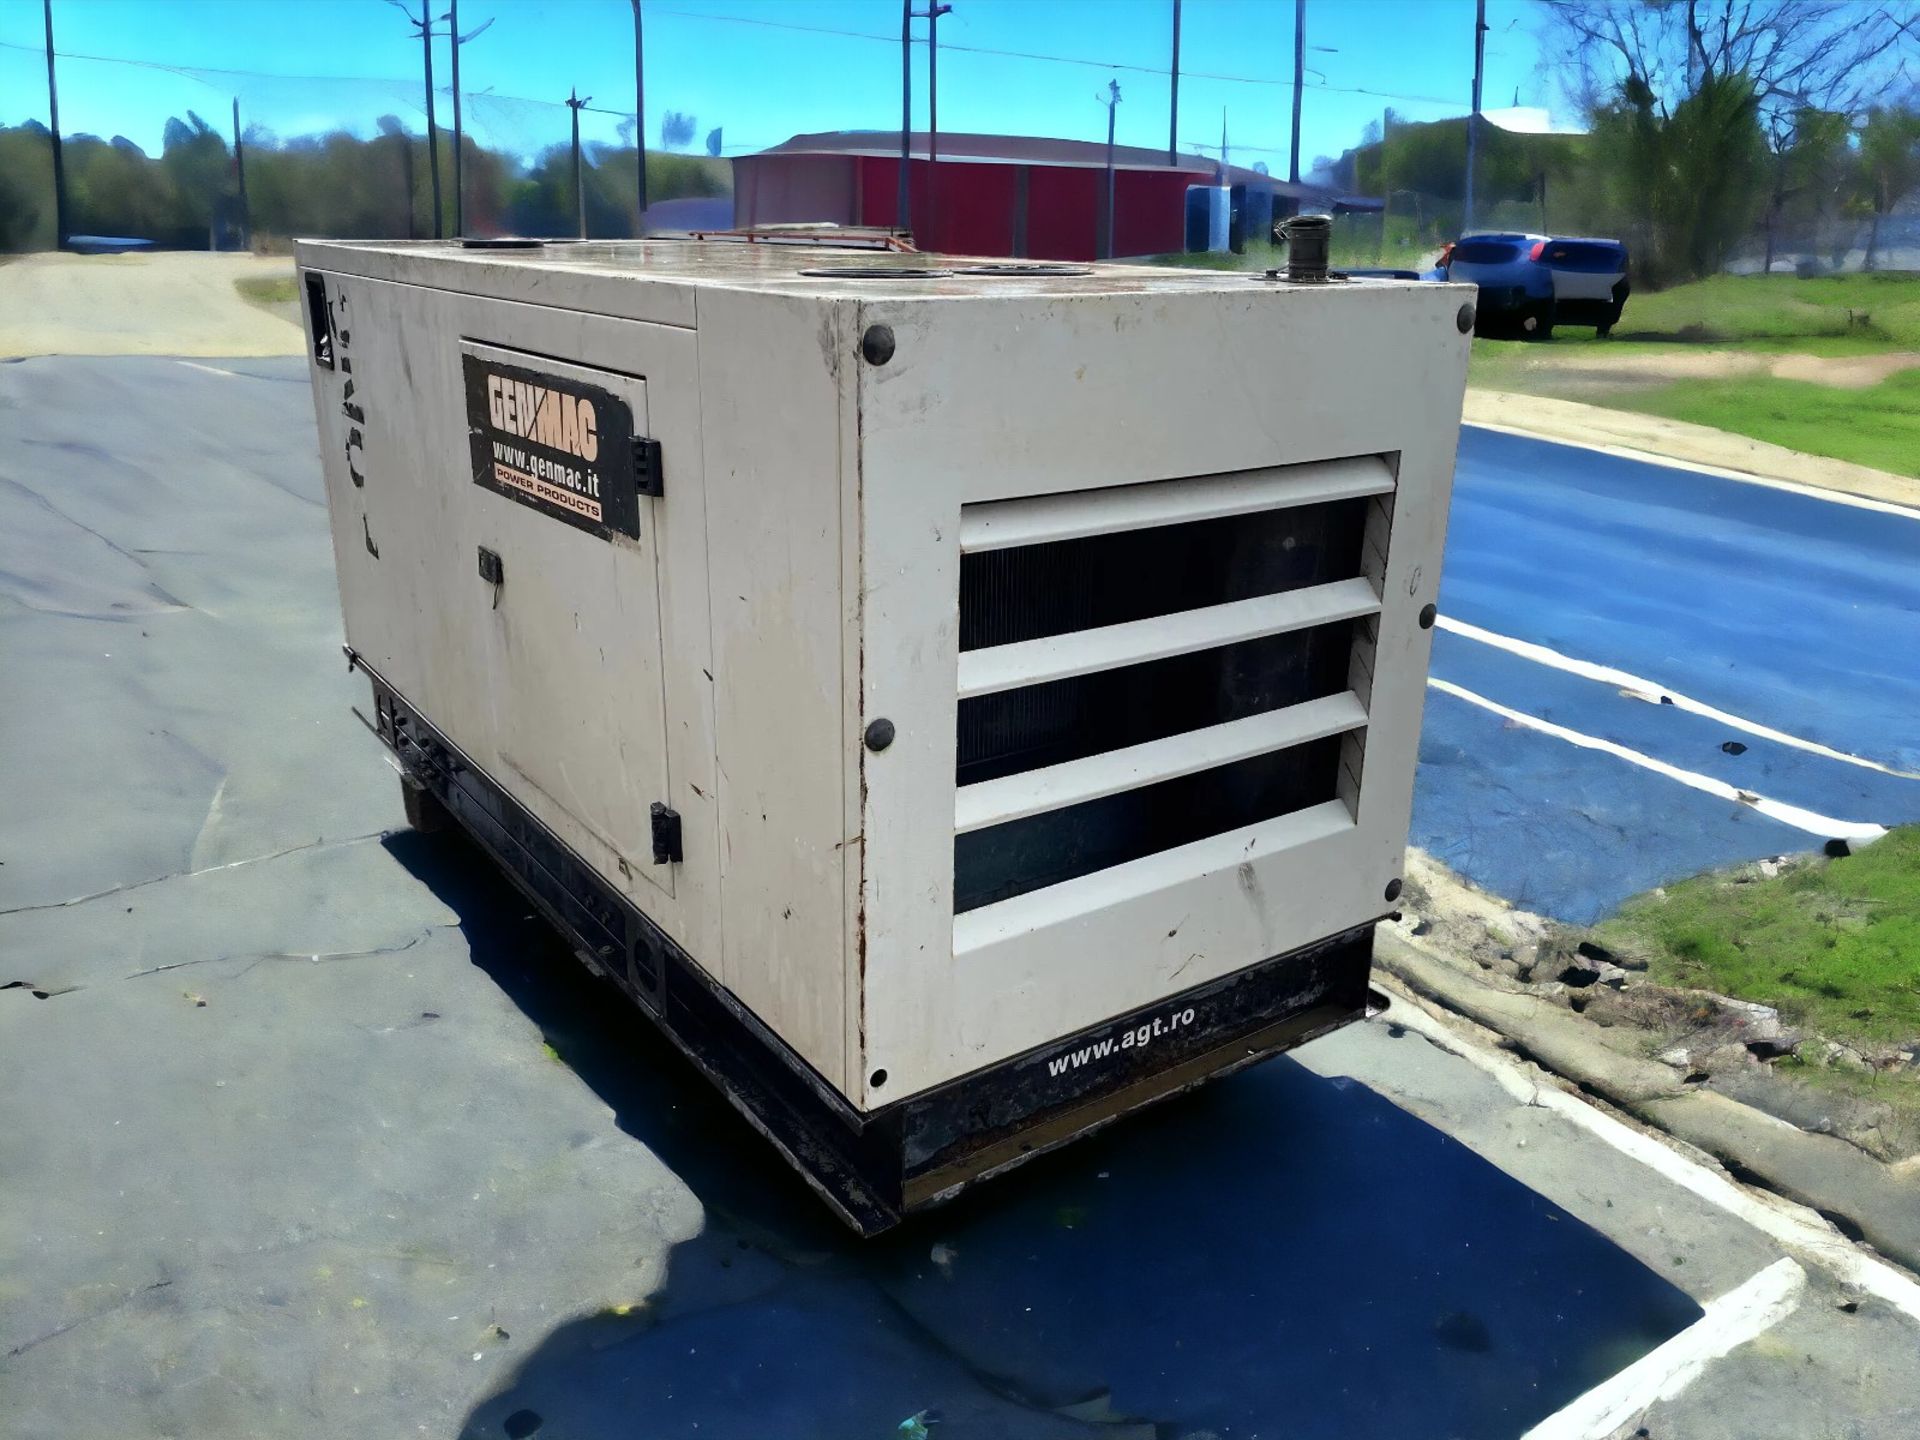 POWER UP YOUR PROJECTS WITH THE GENMAC 80 KVA SILENT GENERATOR - Image 4 of 11